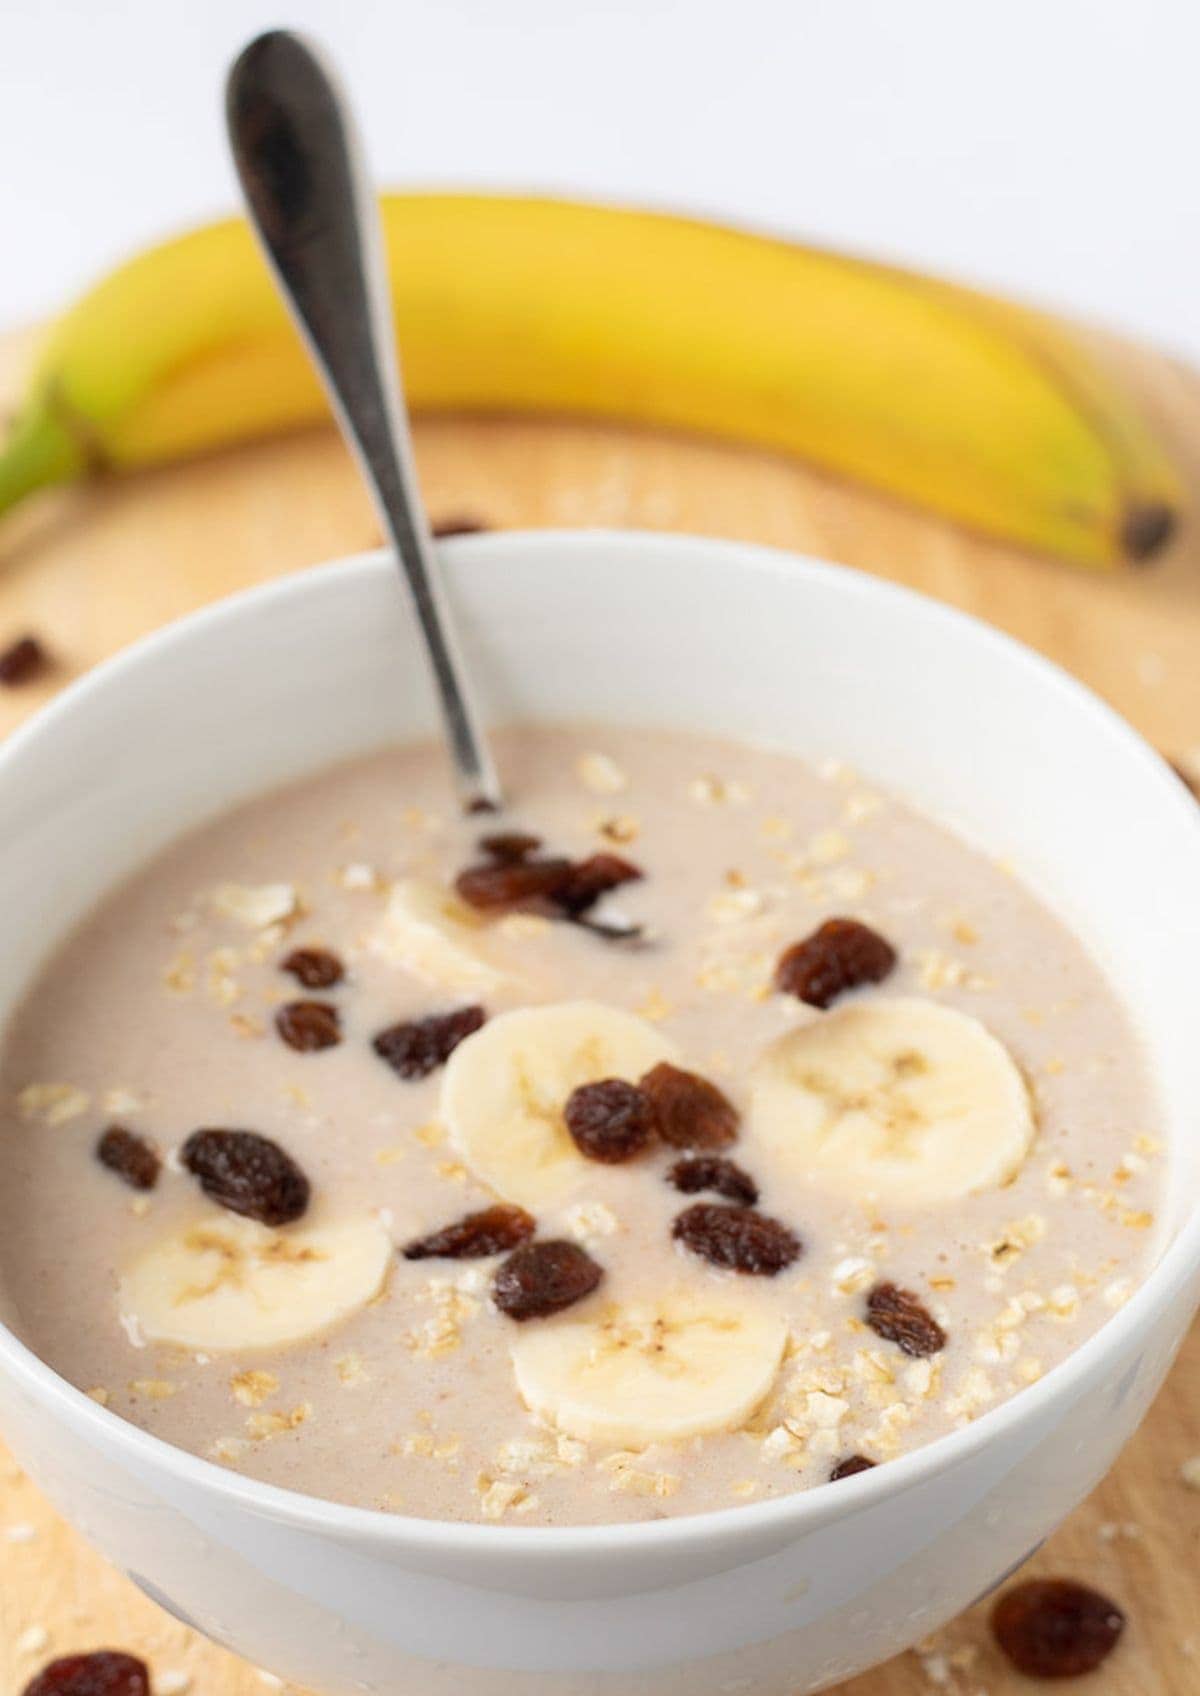 A bowl of delicious banana cinnamon overnight oats topped with slices of banana and a spoon in, ready to eat with a banana in the background as decoration.